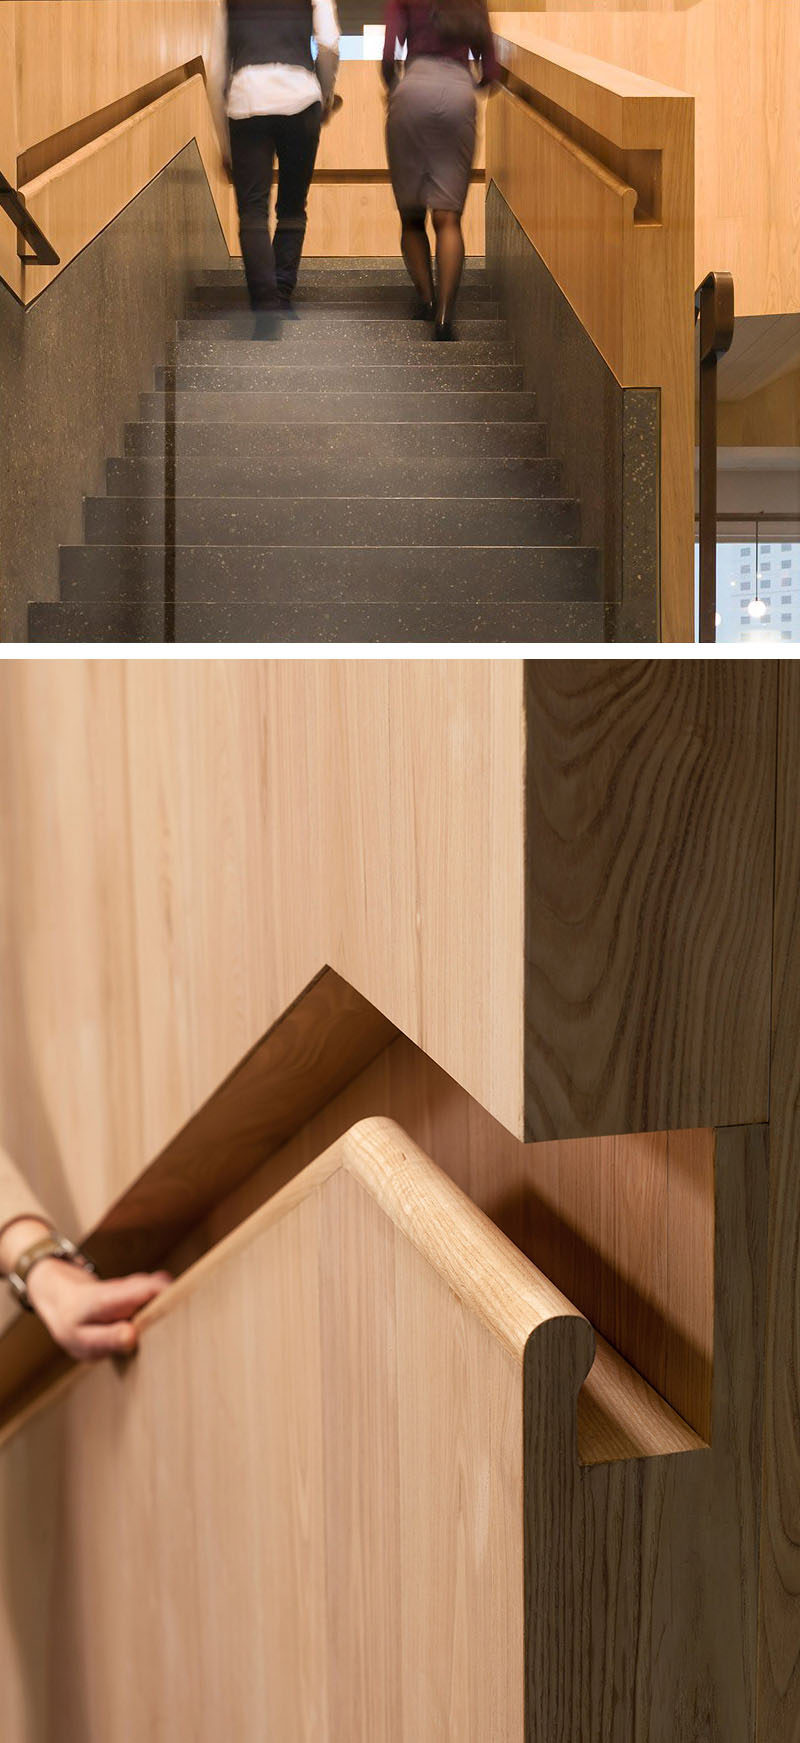 Stair Design Idea - This wooden handrail was built into the stair surround for a seamless and clean look.